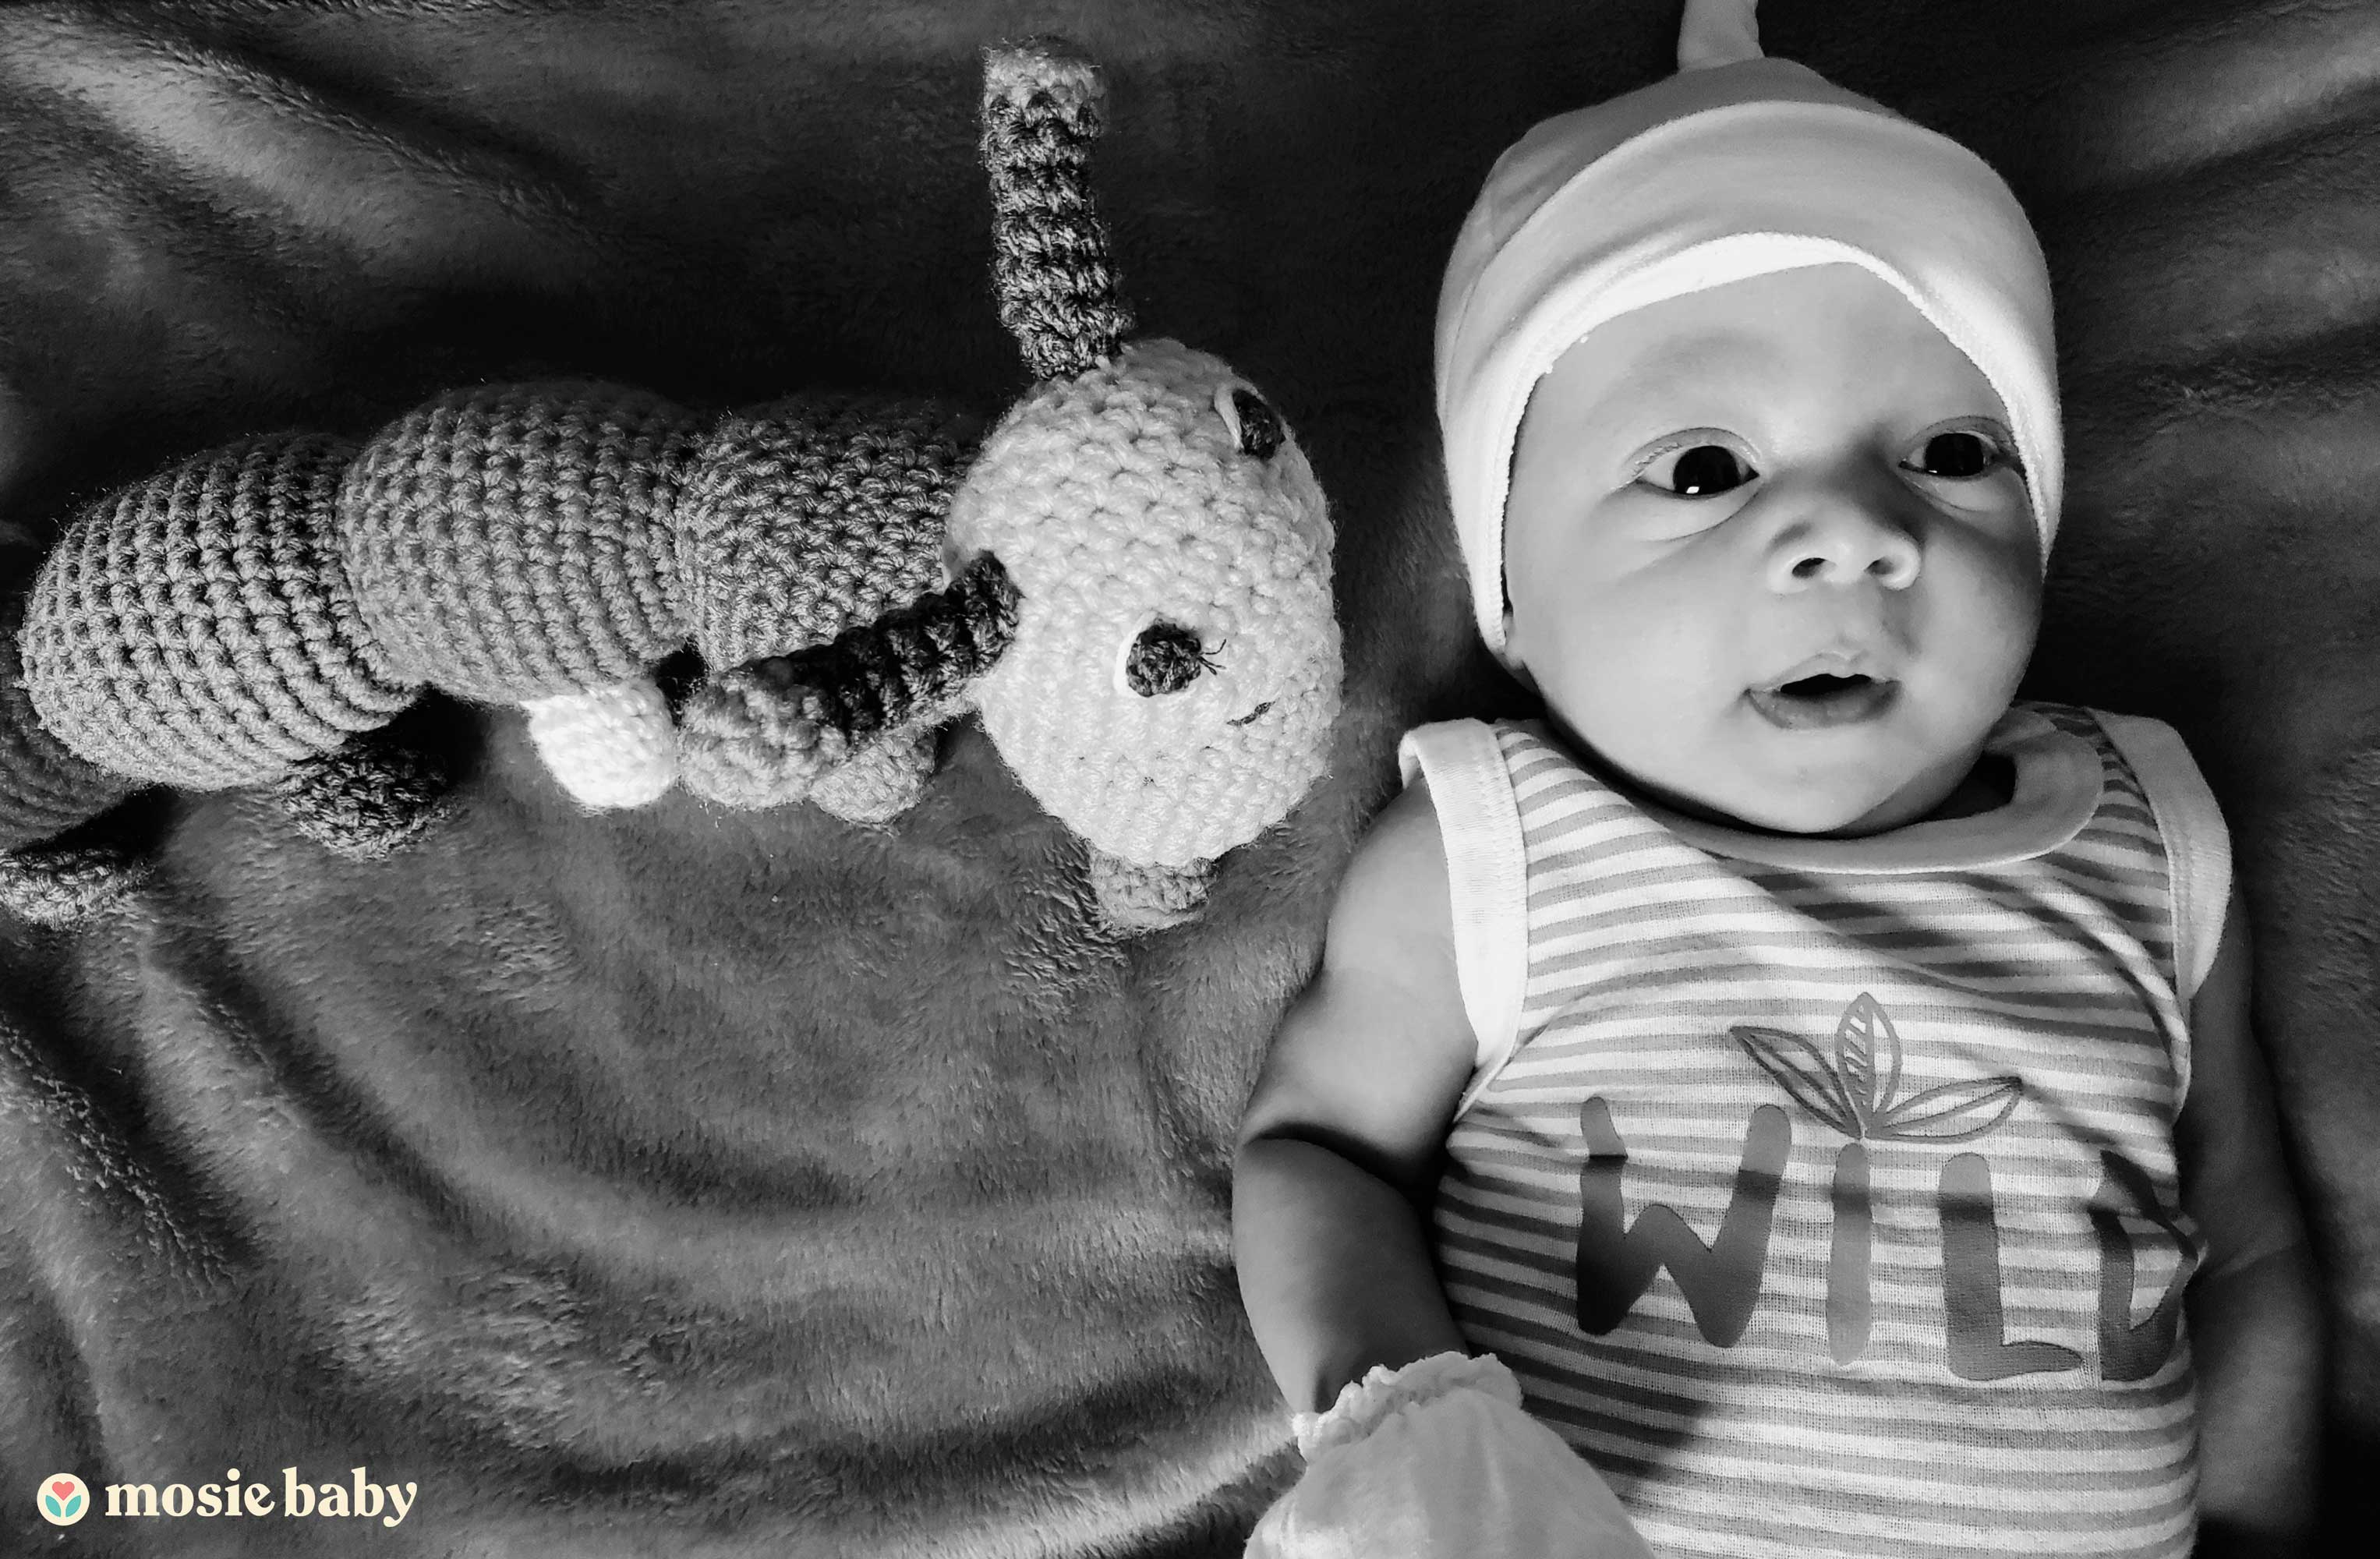 Black and white photo of a baby with a toy stuffed animal